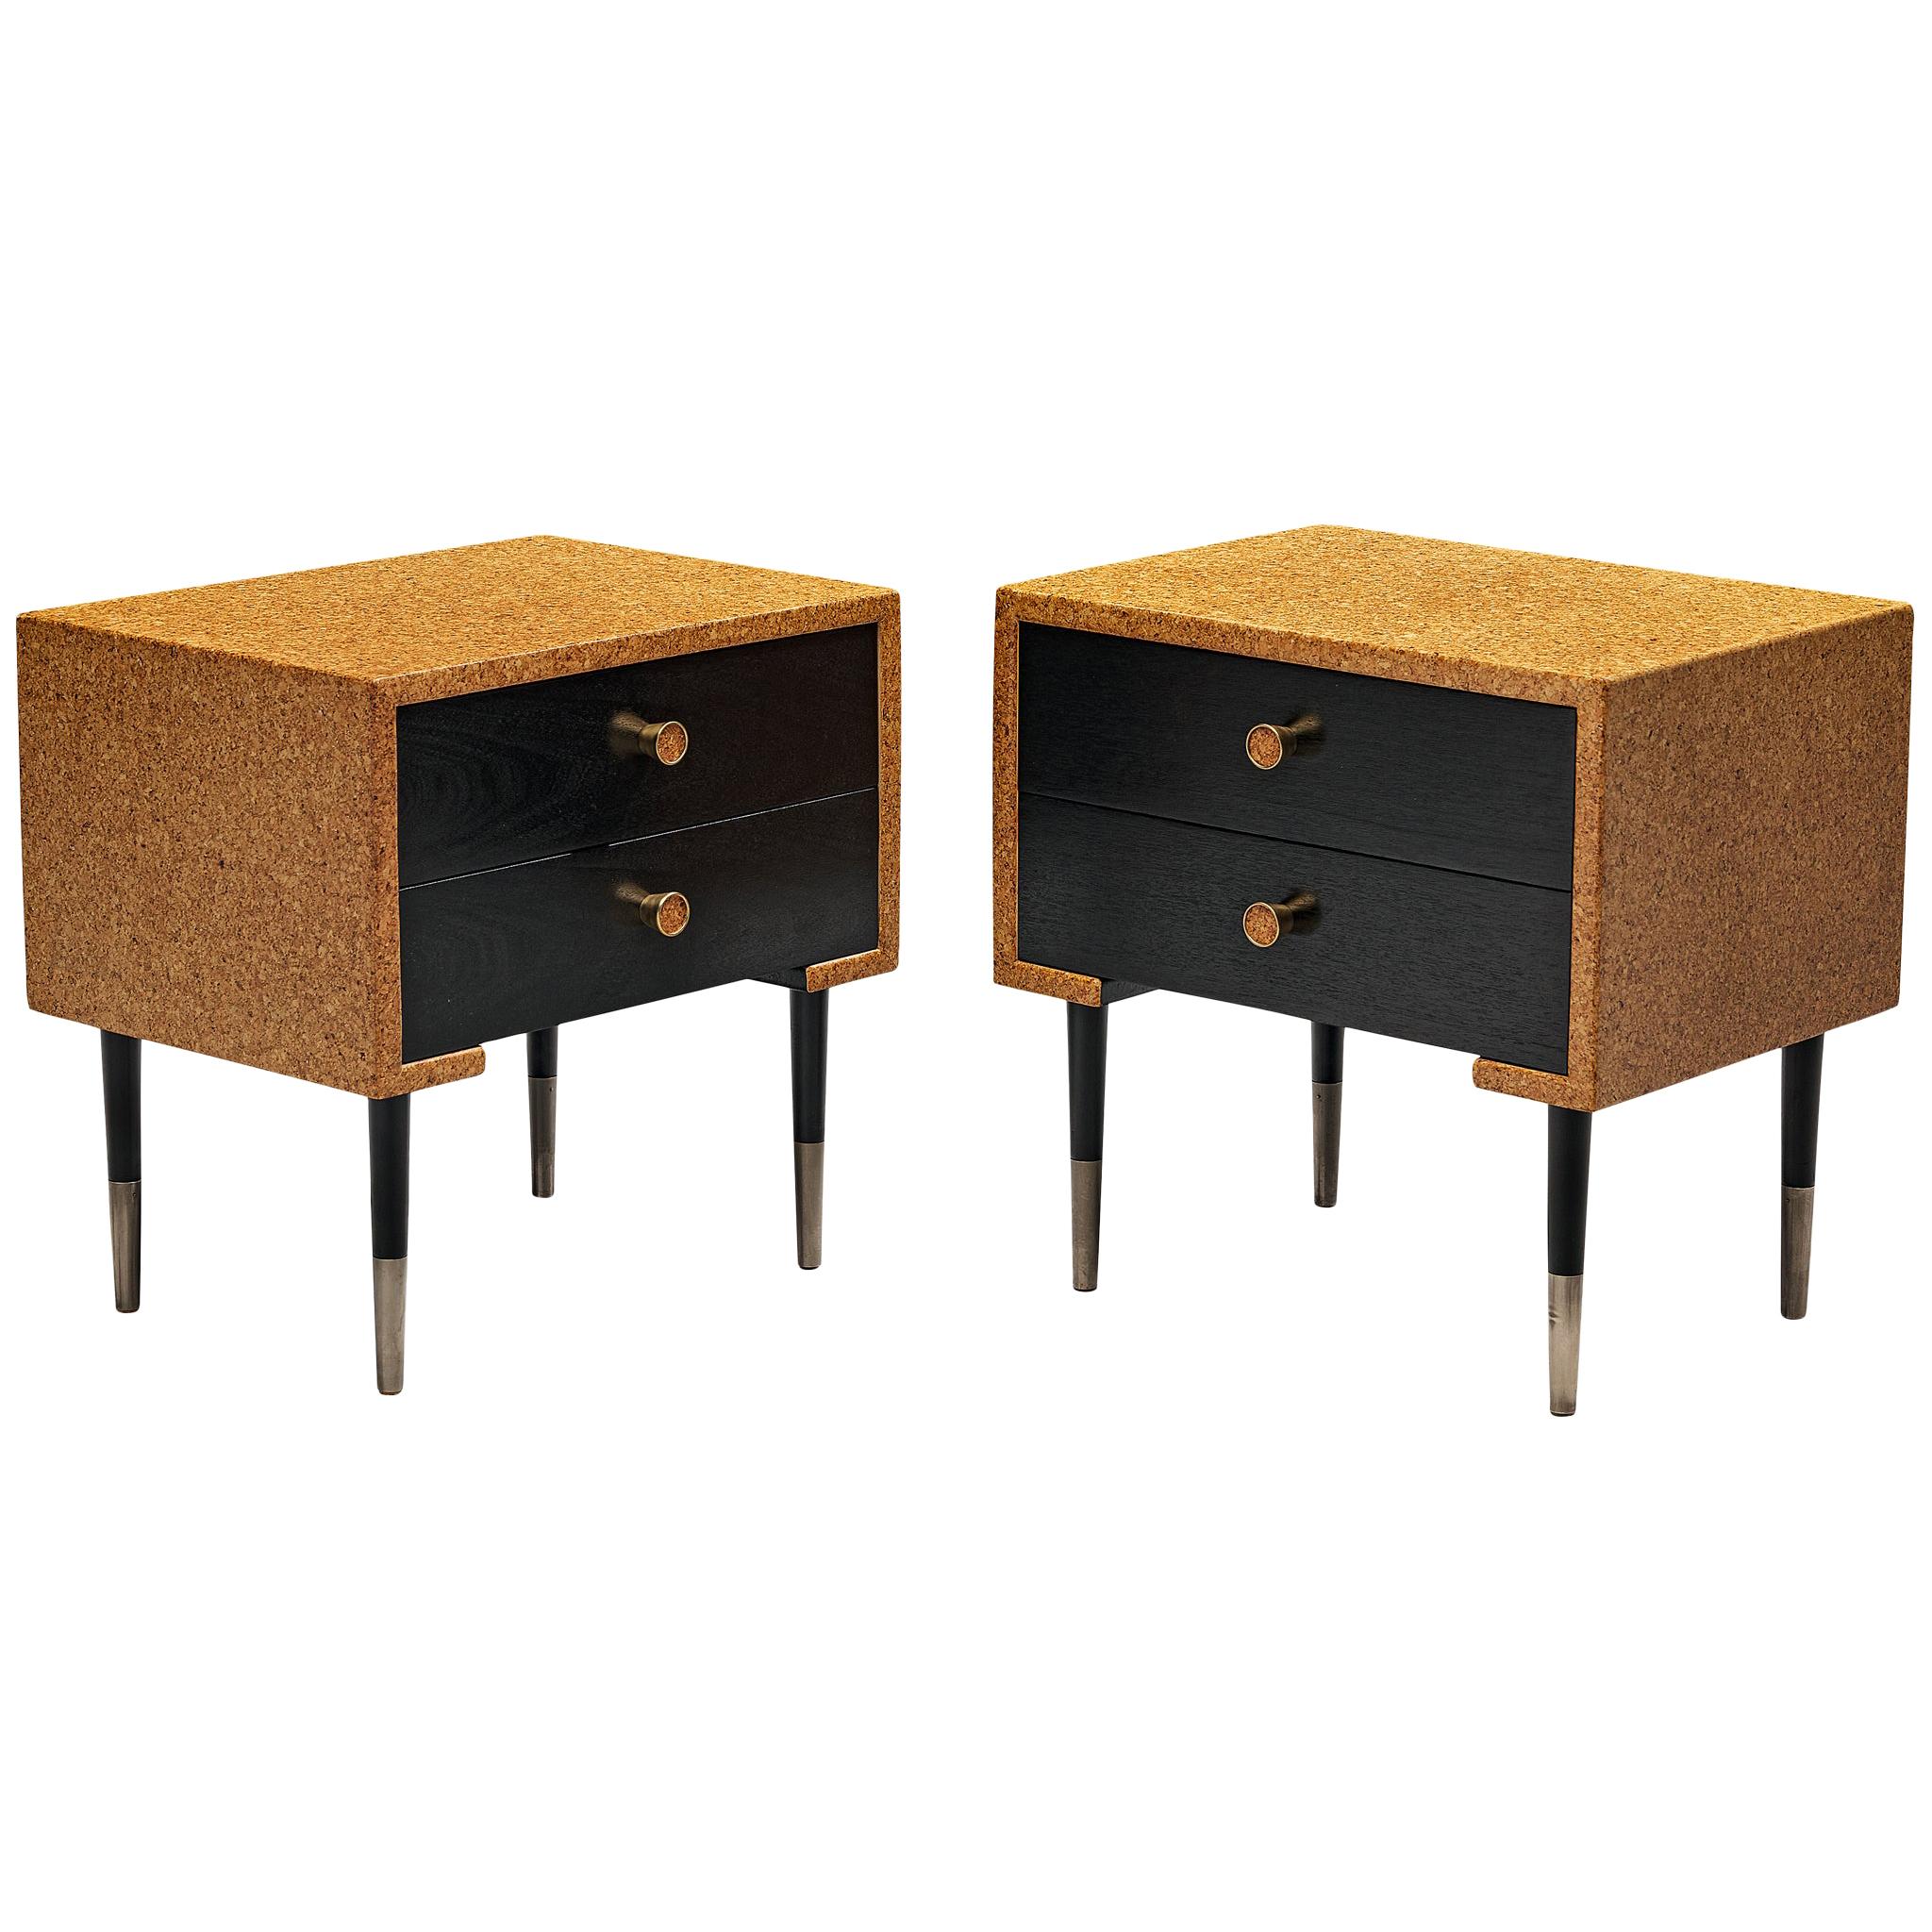 Paul Frankl Pair of Nightstands in Cork and Wood